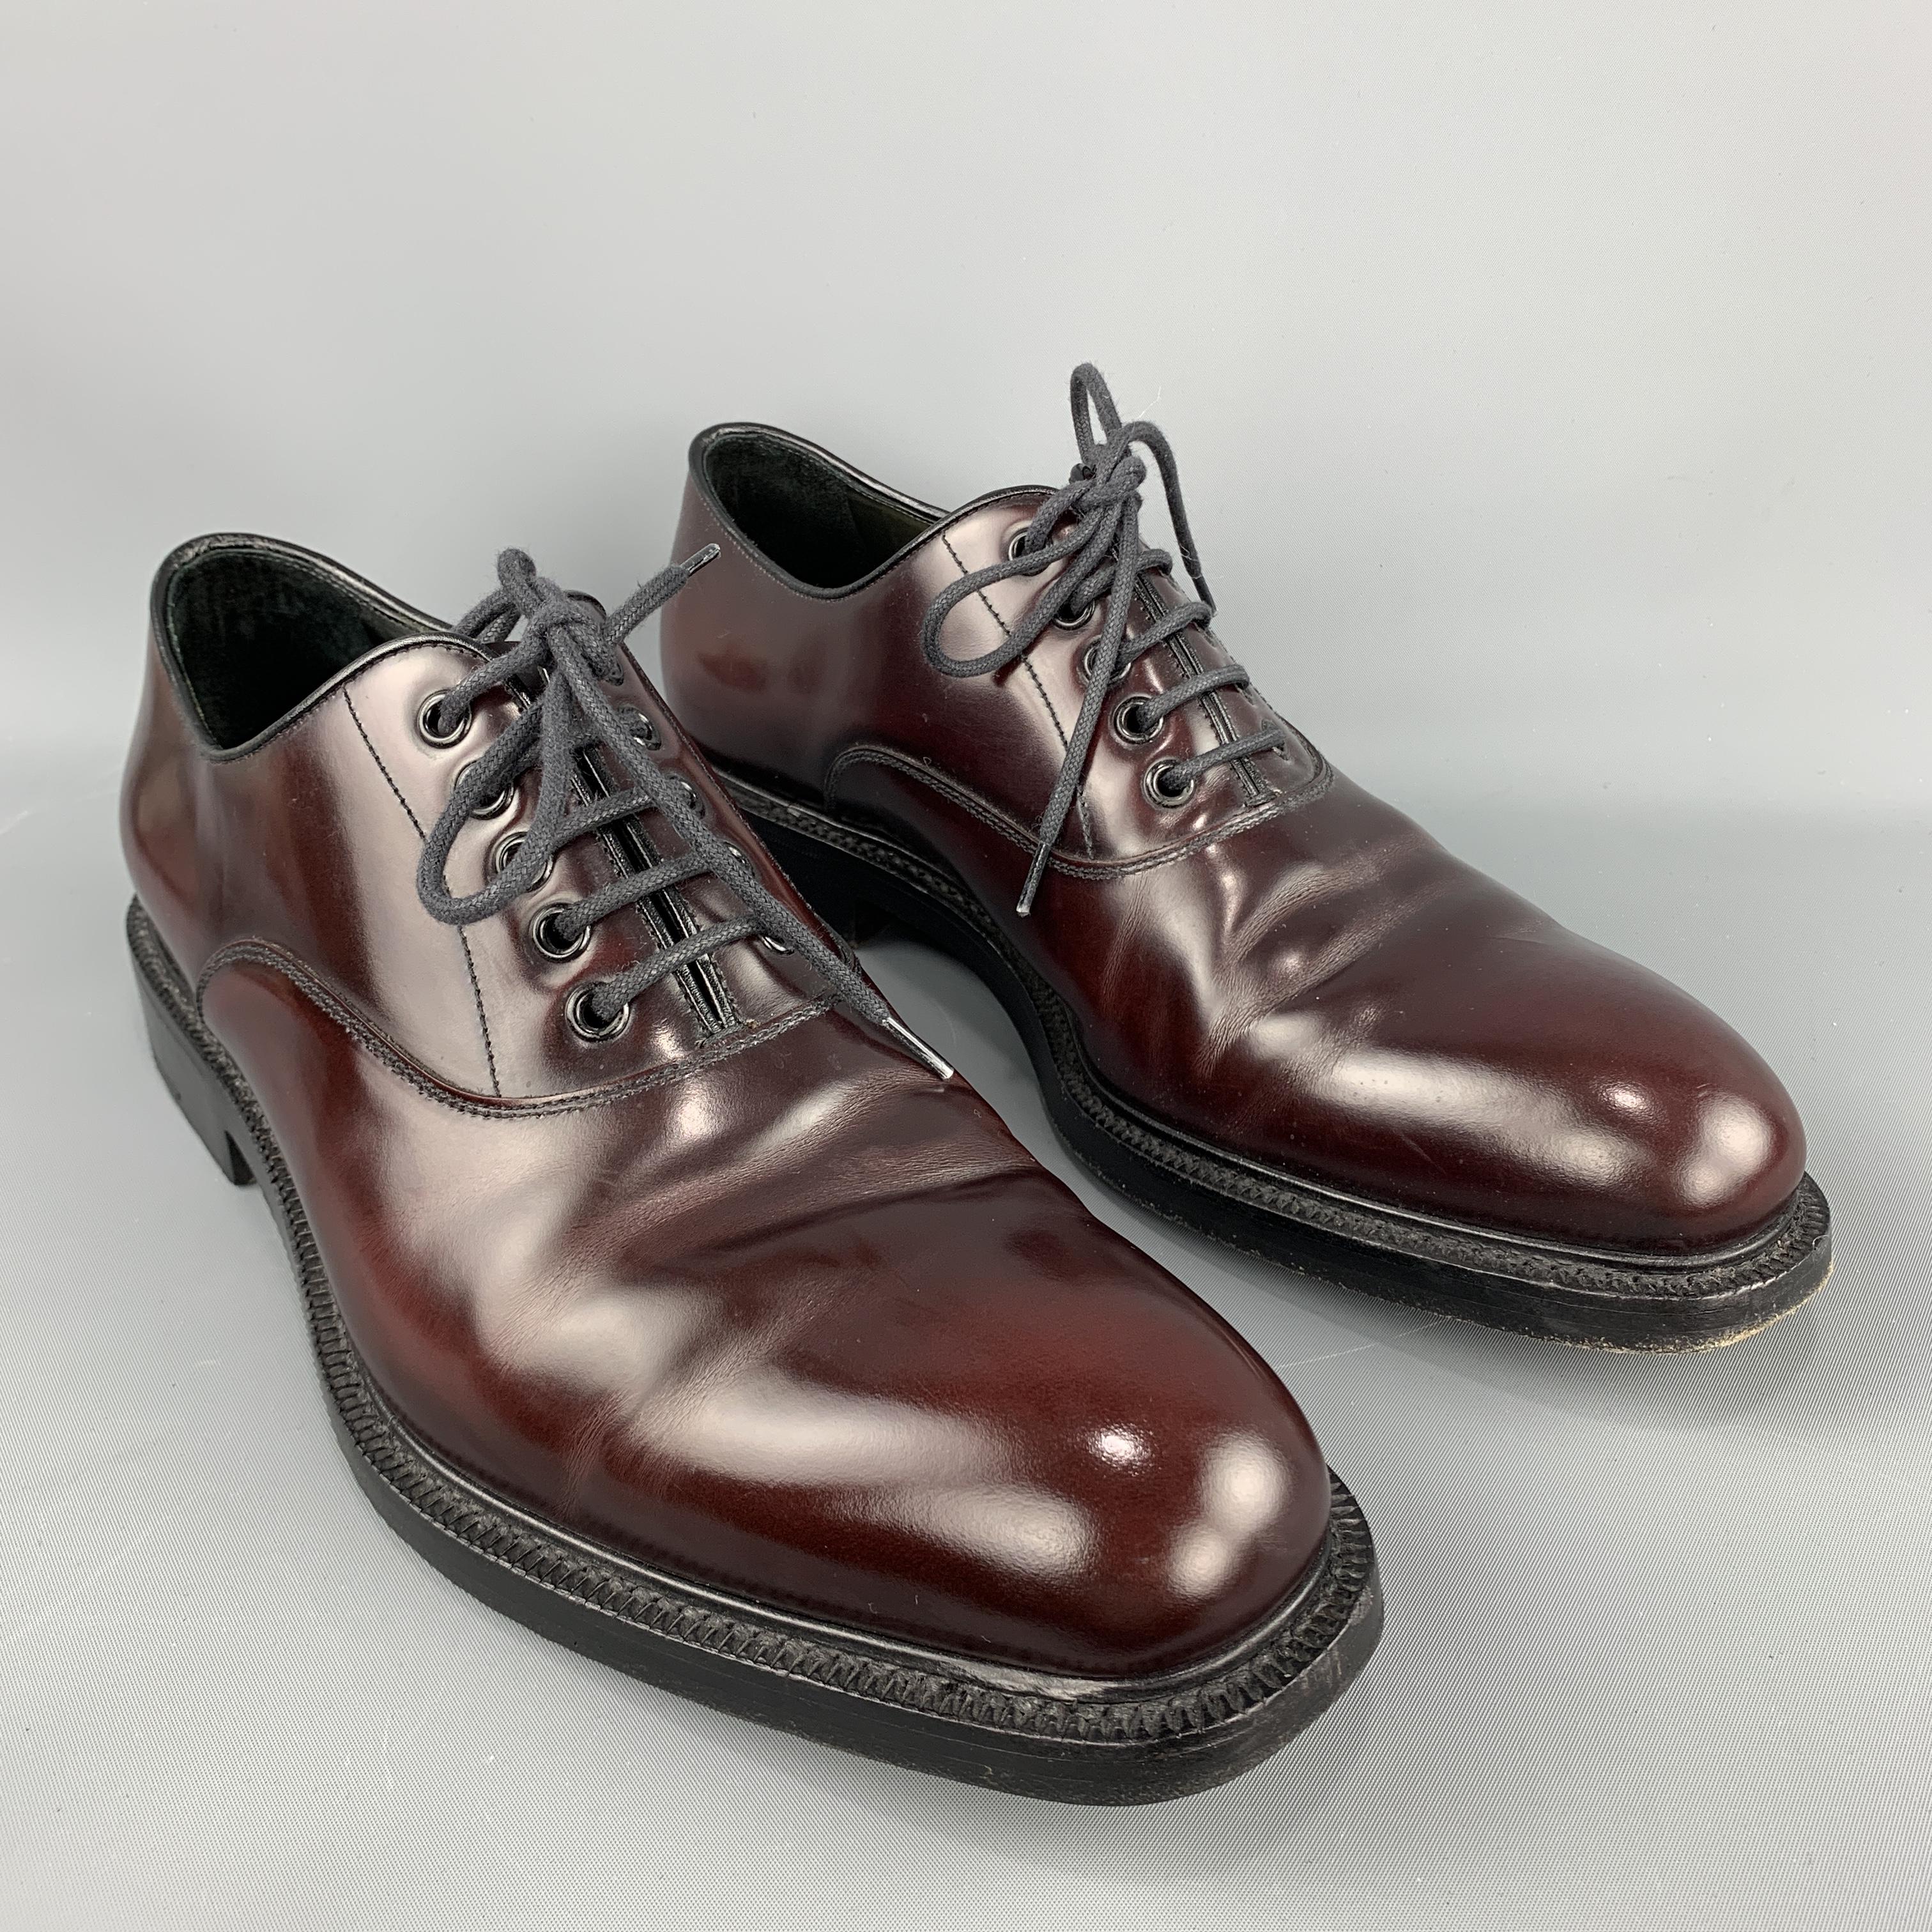 PRADA Lace Up Shoes comes in a burgundy tone in a solid polished leather material, with a pointed round toe, a thick leather sole, lace up.

Excellent Pre-Owned Condition.
Marked: UK 9 1/2   2 EA  075

Outsole: 4.7 x 12.8 in. 